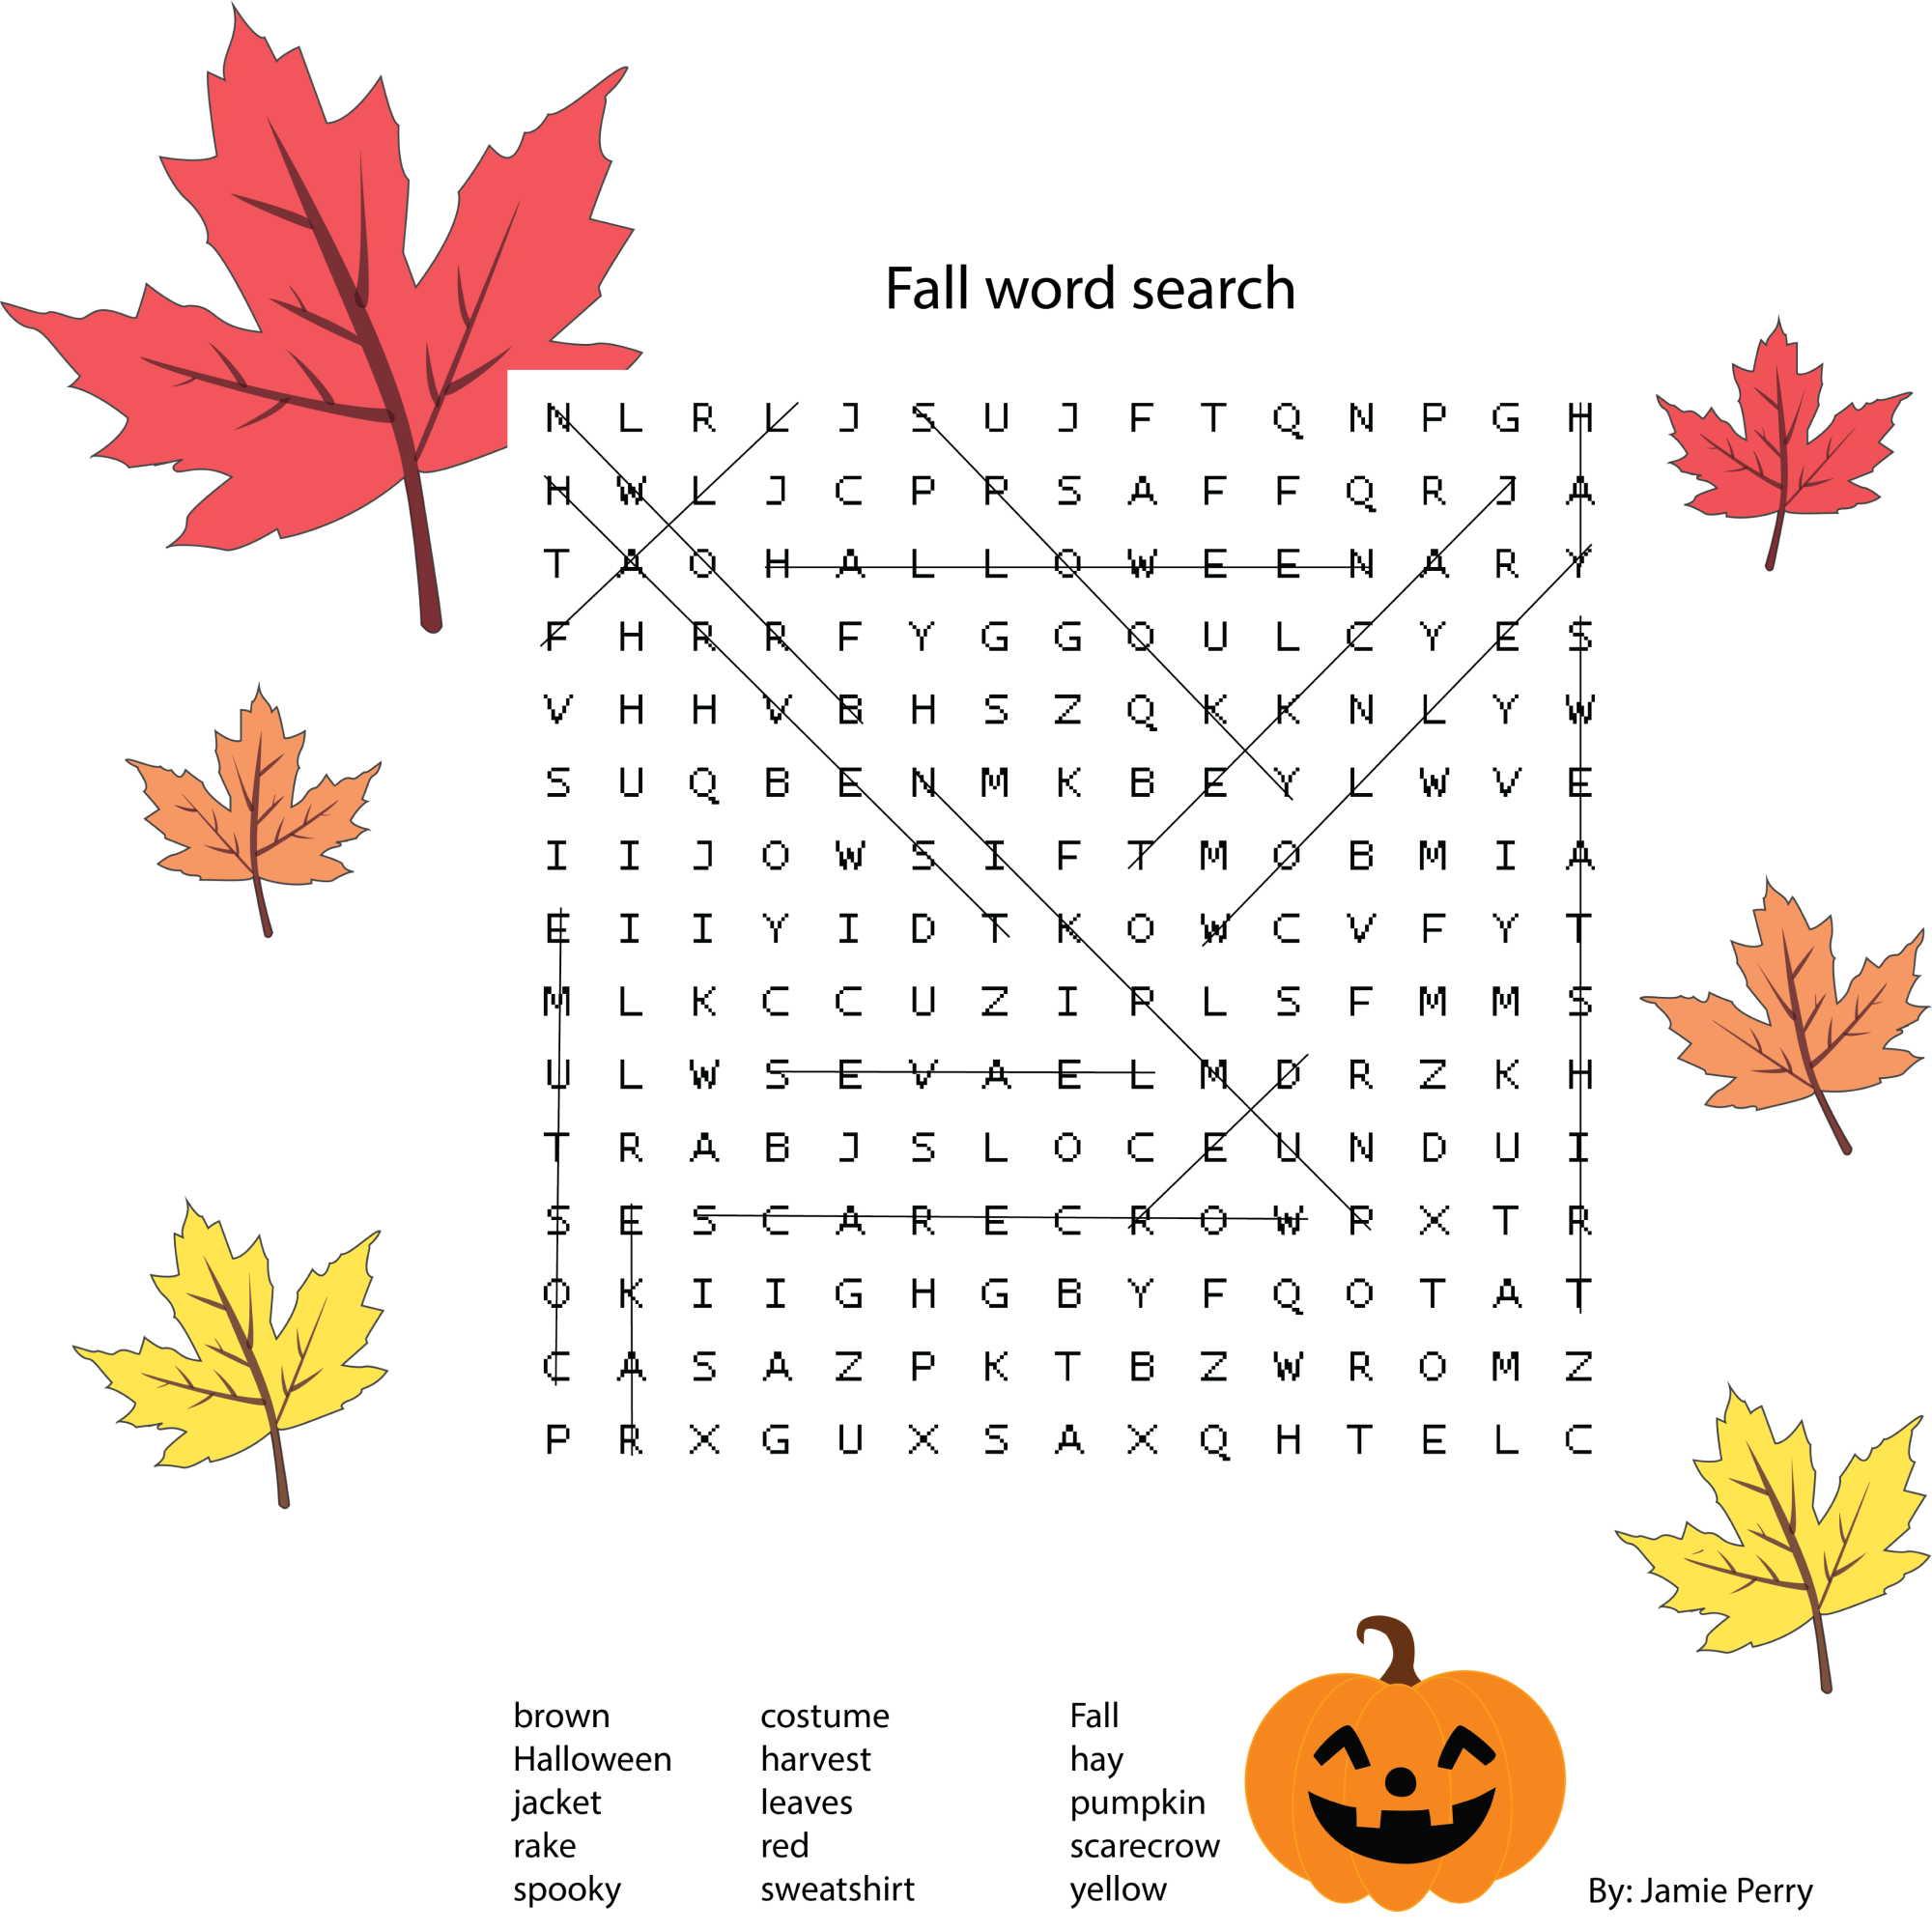 Fall Word Search Answers